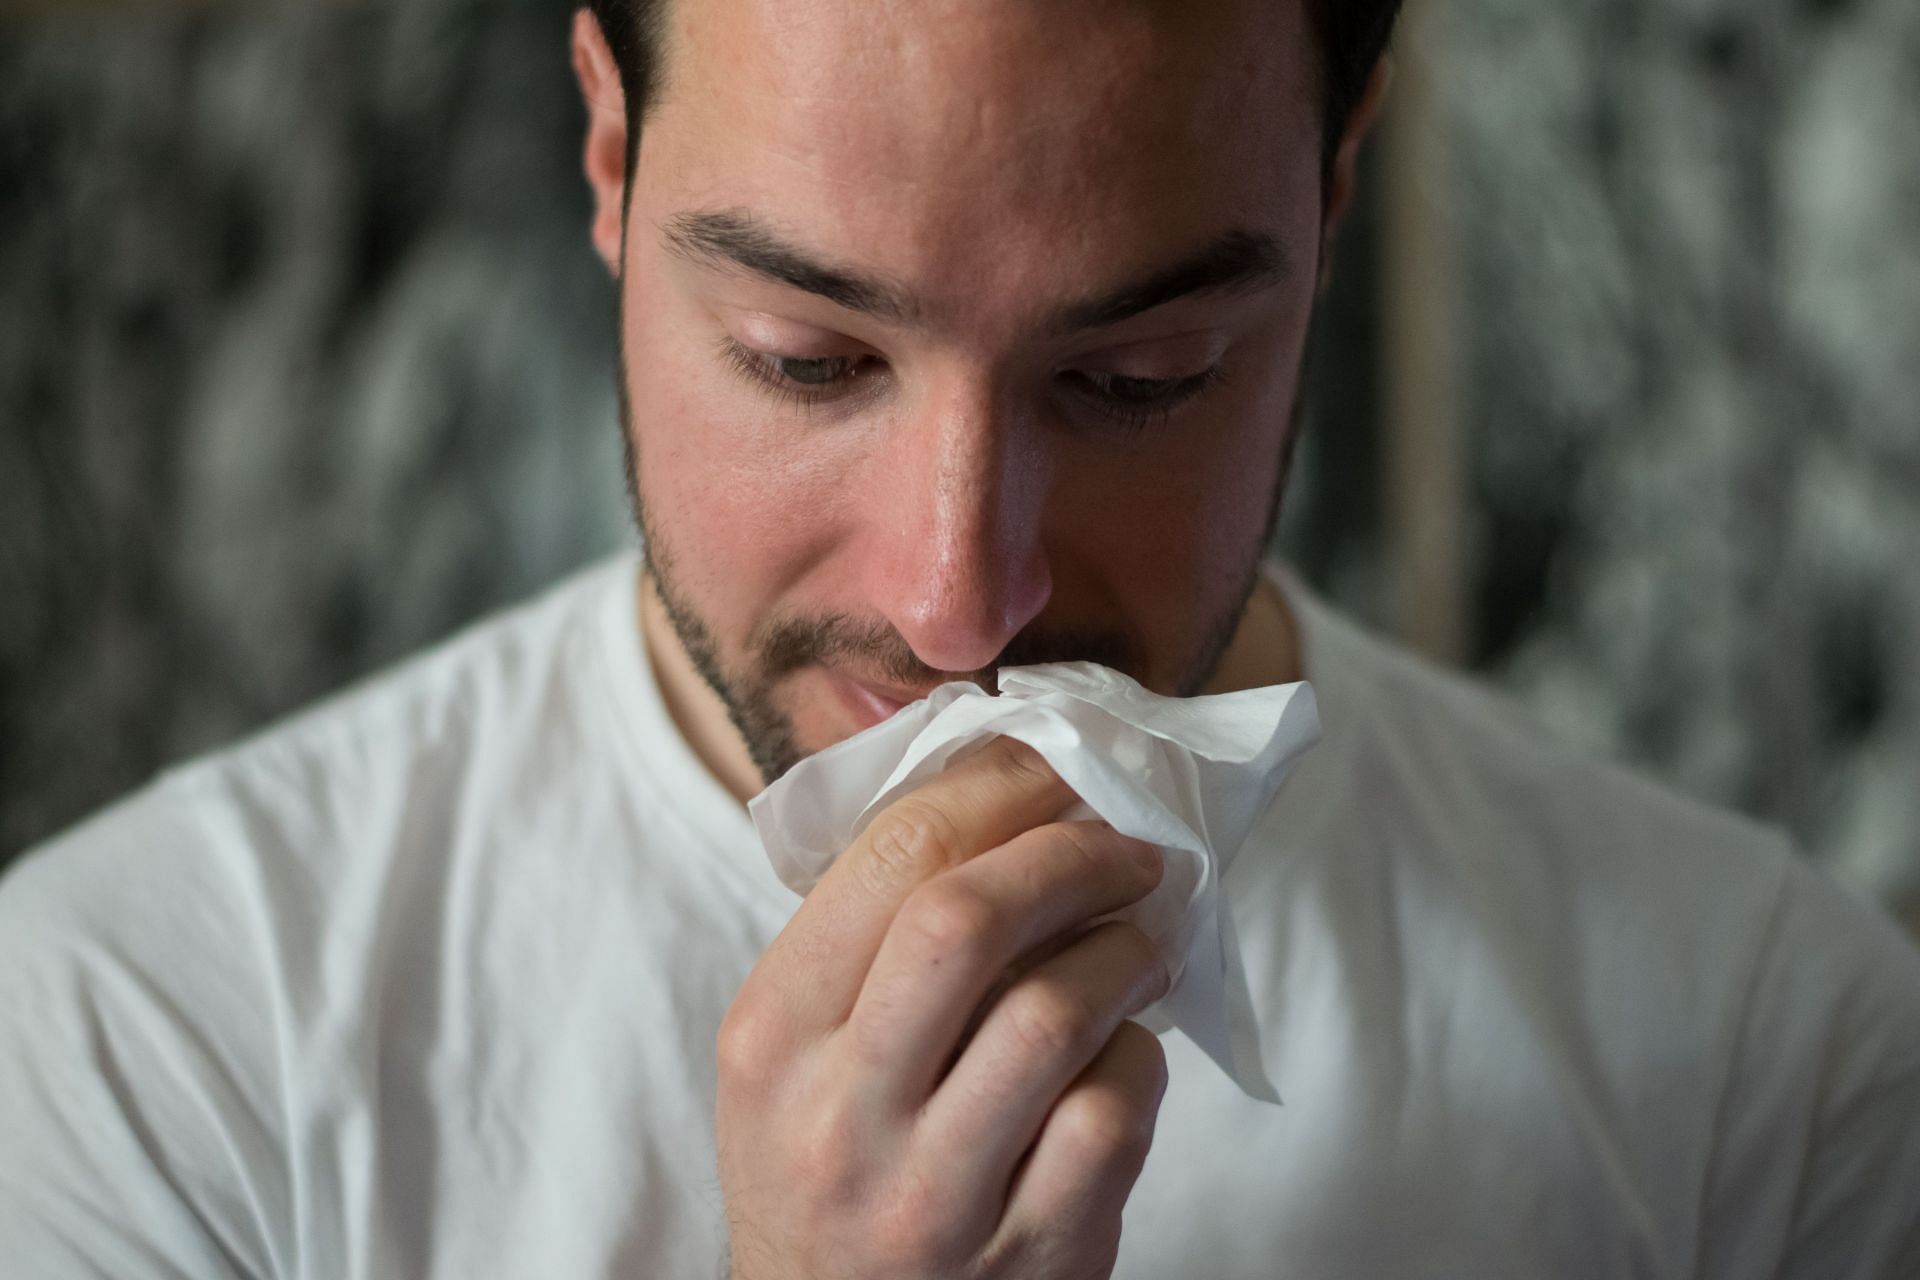 Garlic in nose&#039; tiktok trend helps in relieving nose congestion. (Image via Unsplash/Brittany Colette)